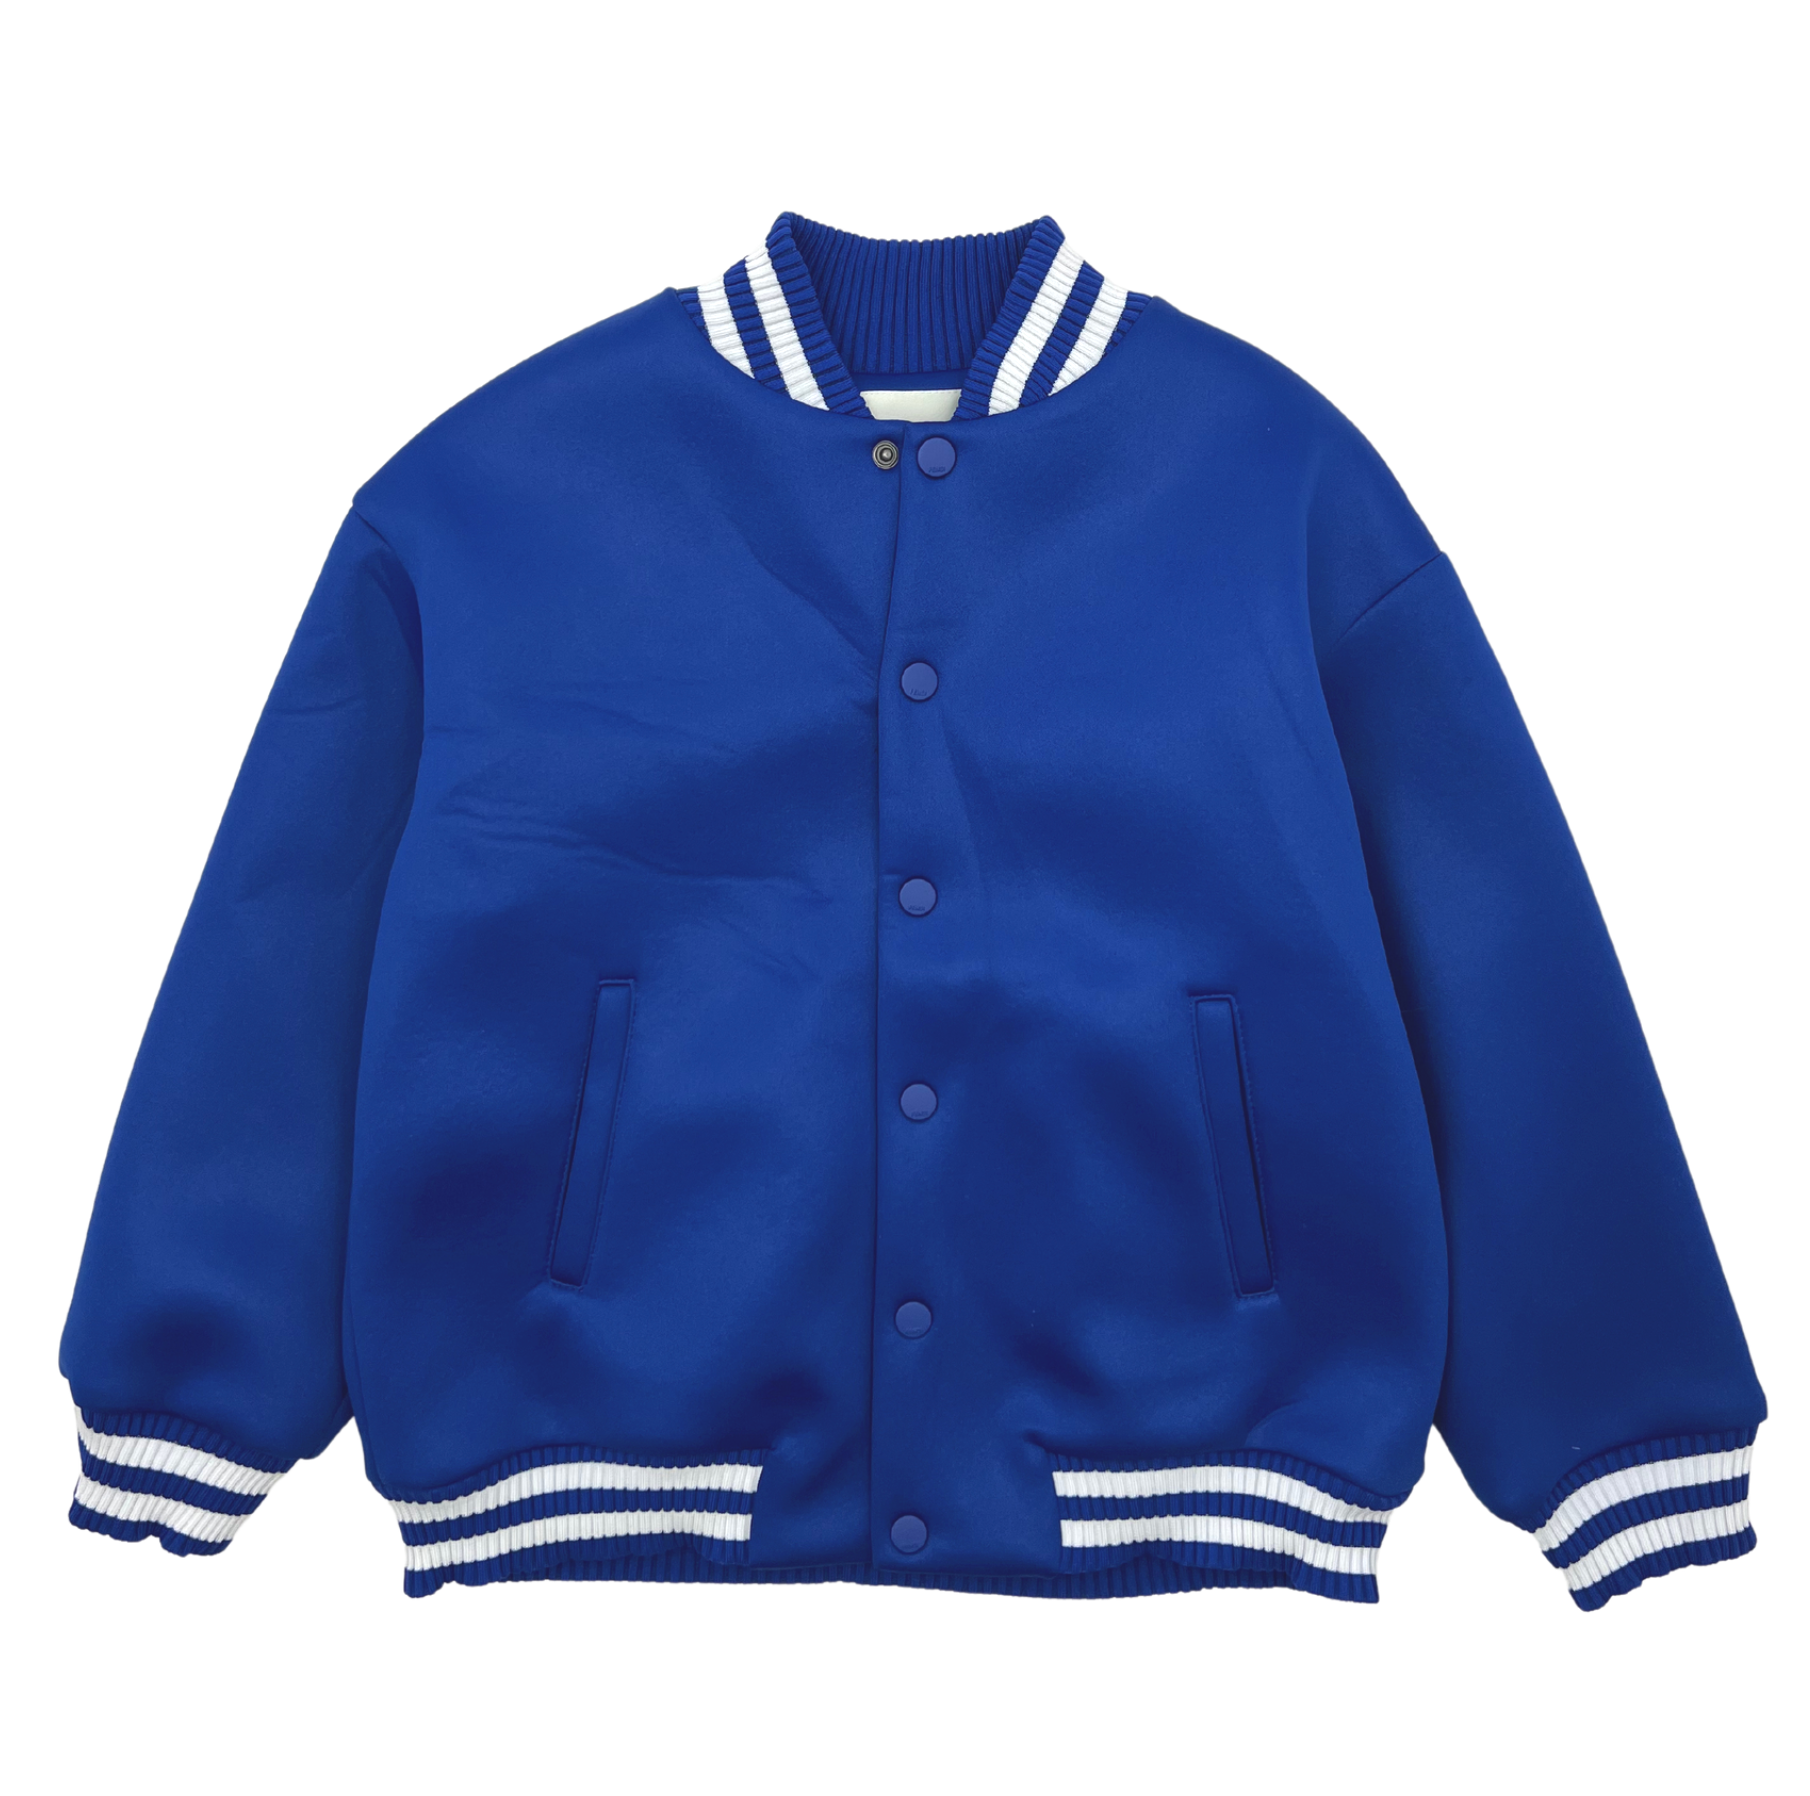 FENDI - Blue bomber jacket with white lines - 6 years old